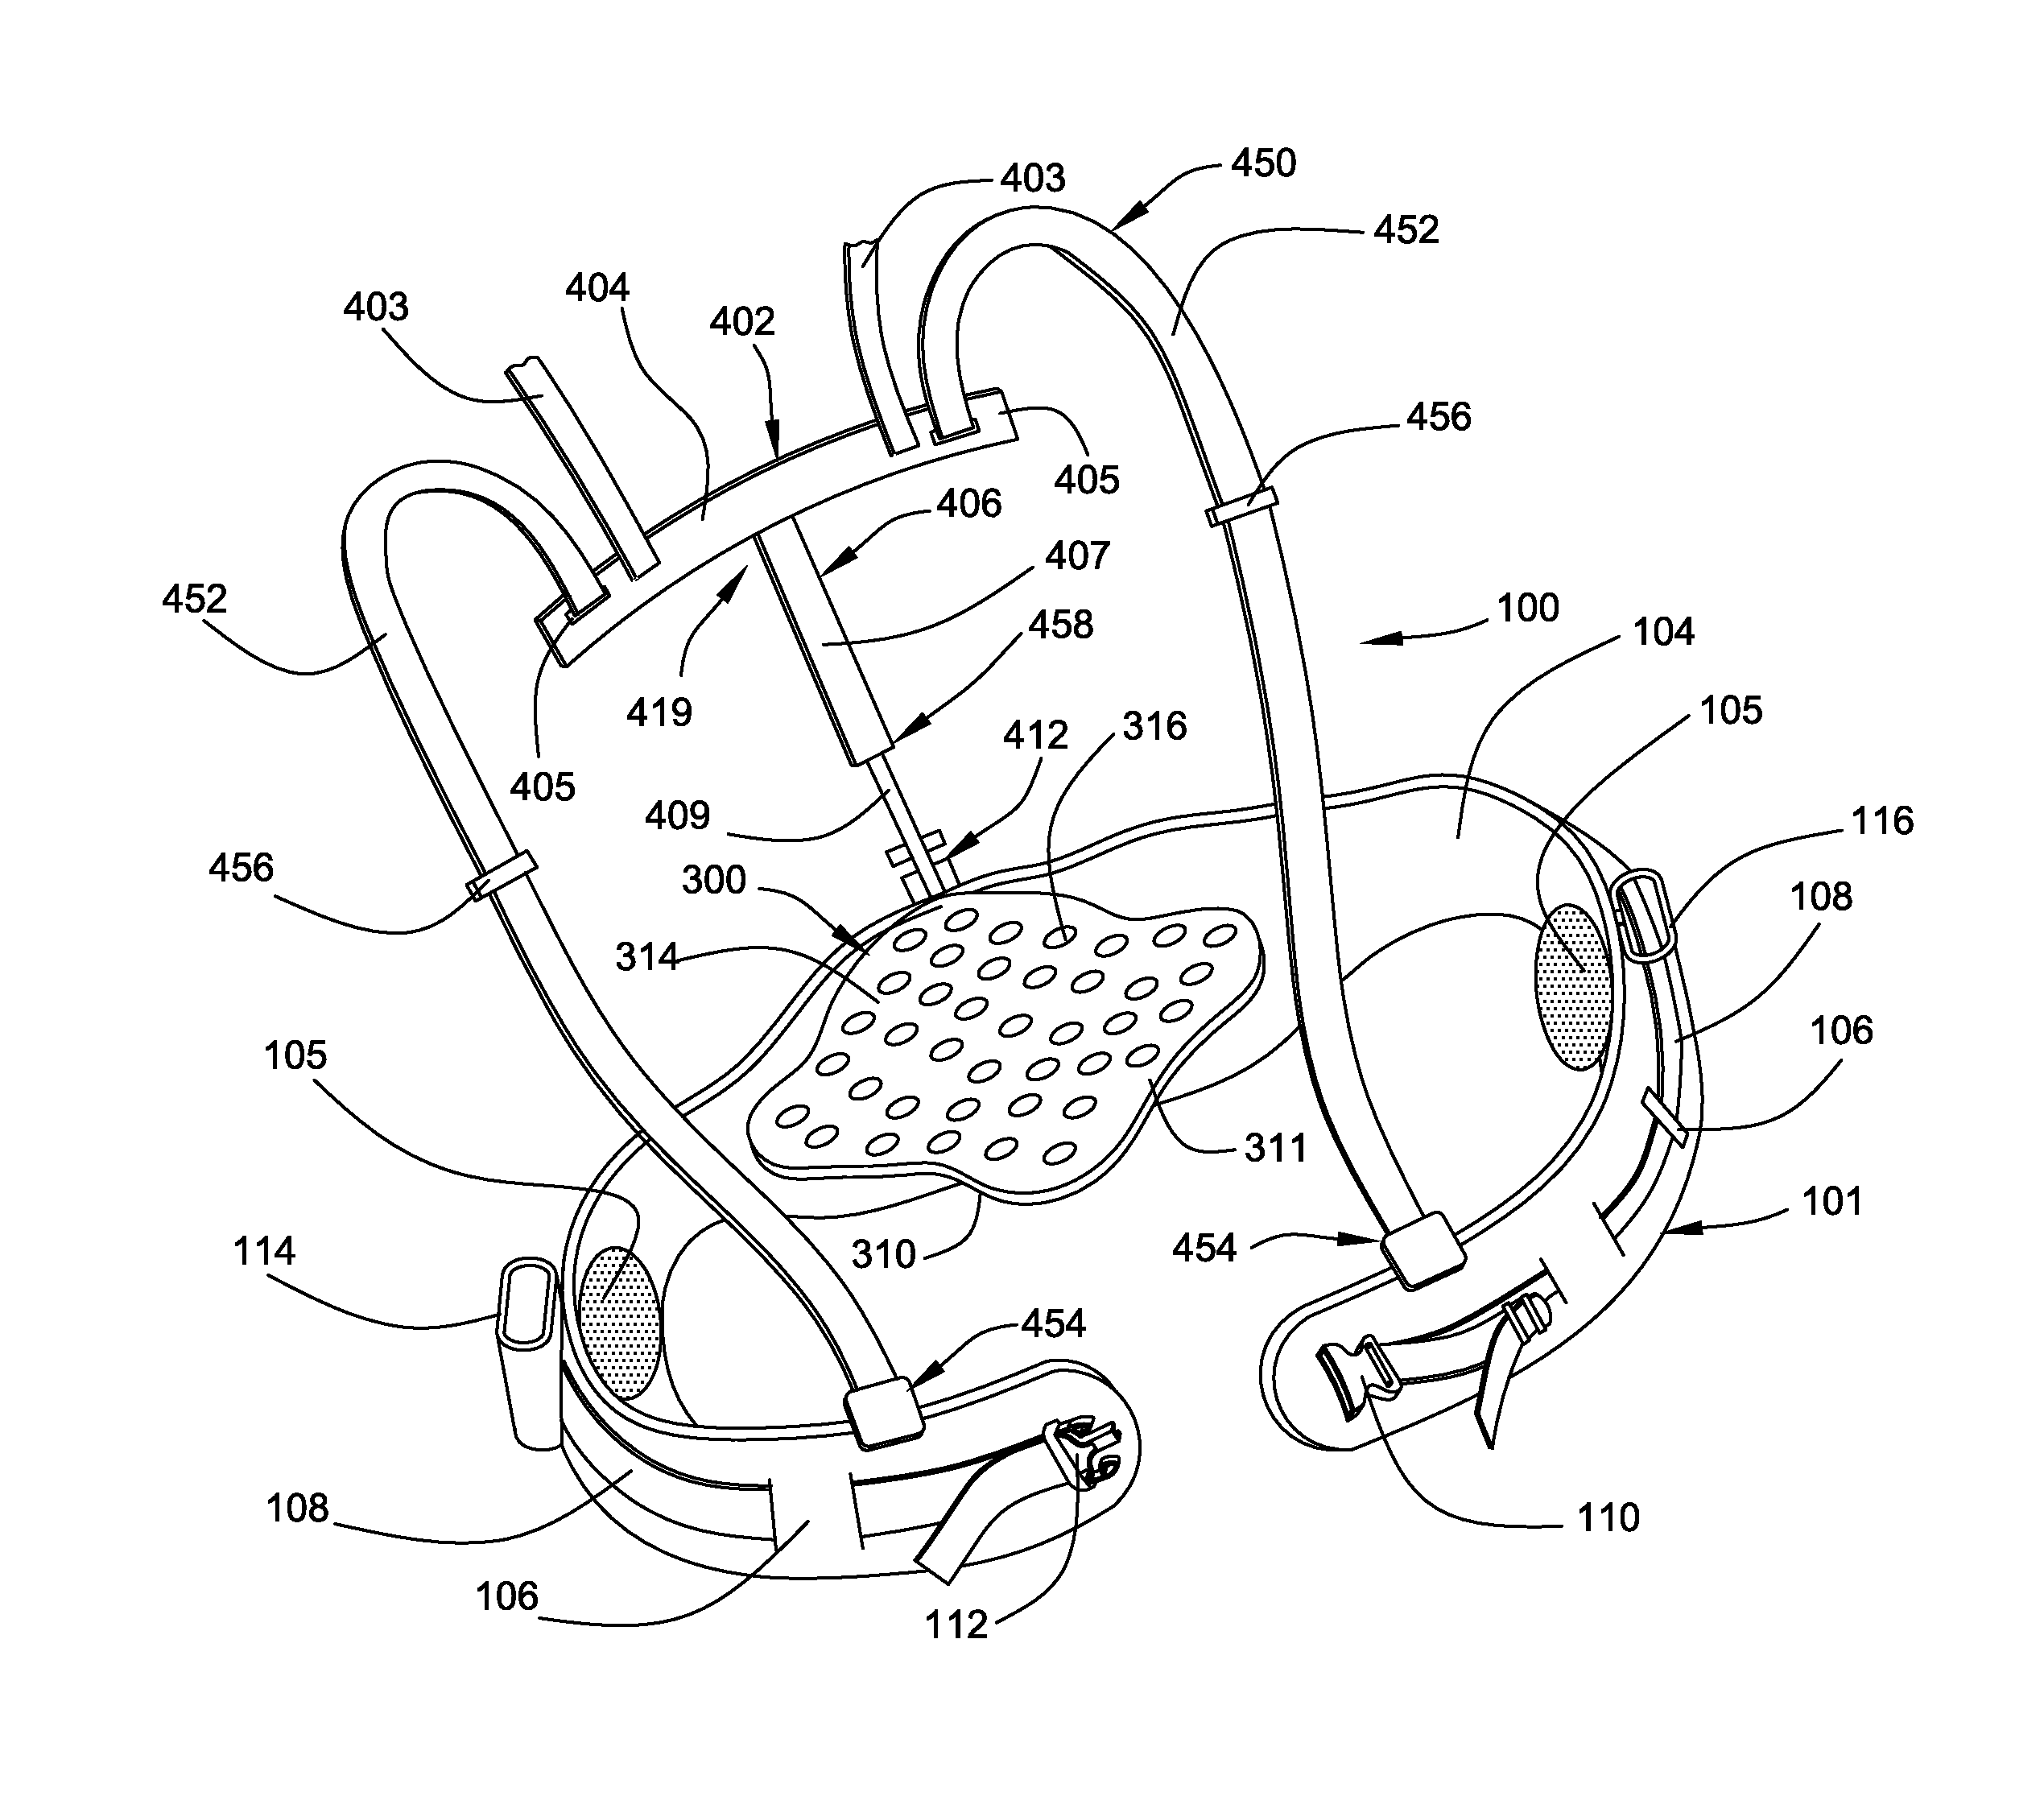 Personal equipment suspension system with active lumbar support